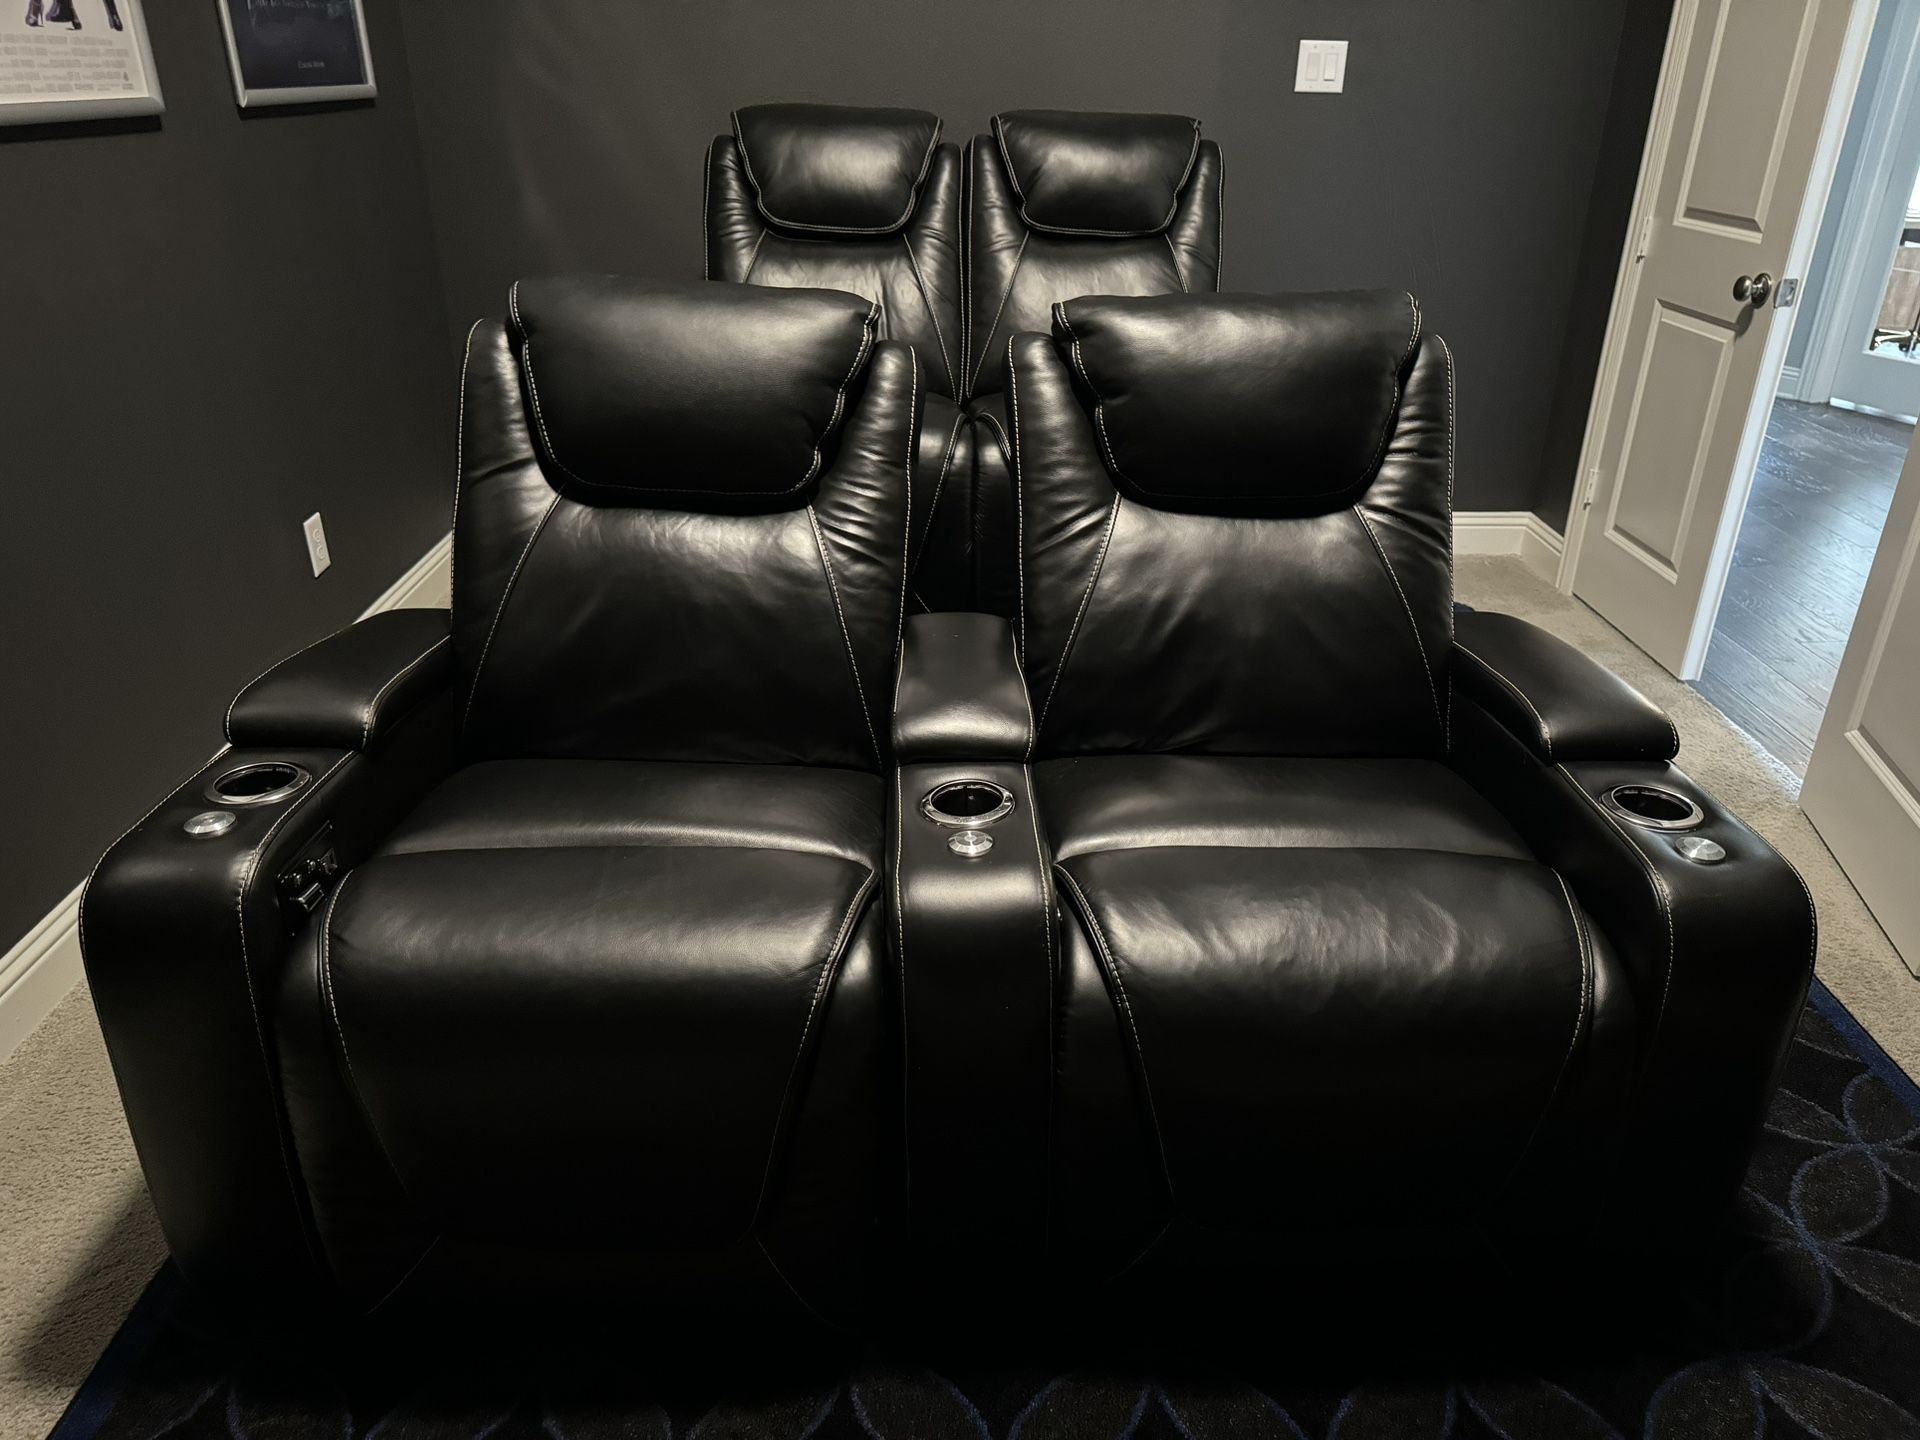 4 Movie Theater Chairs